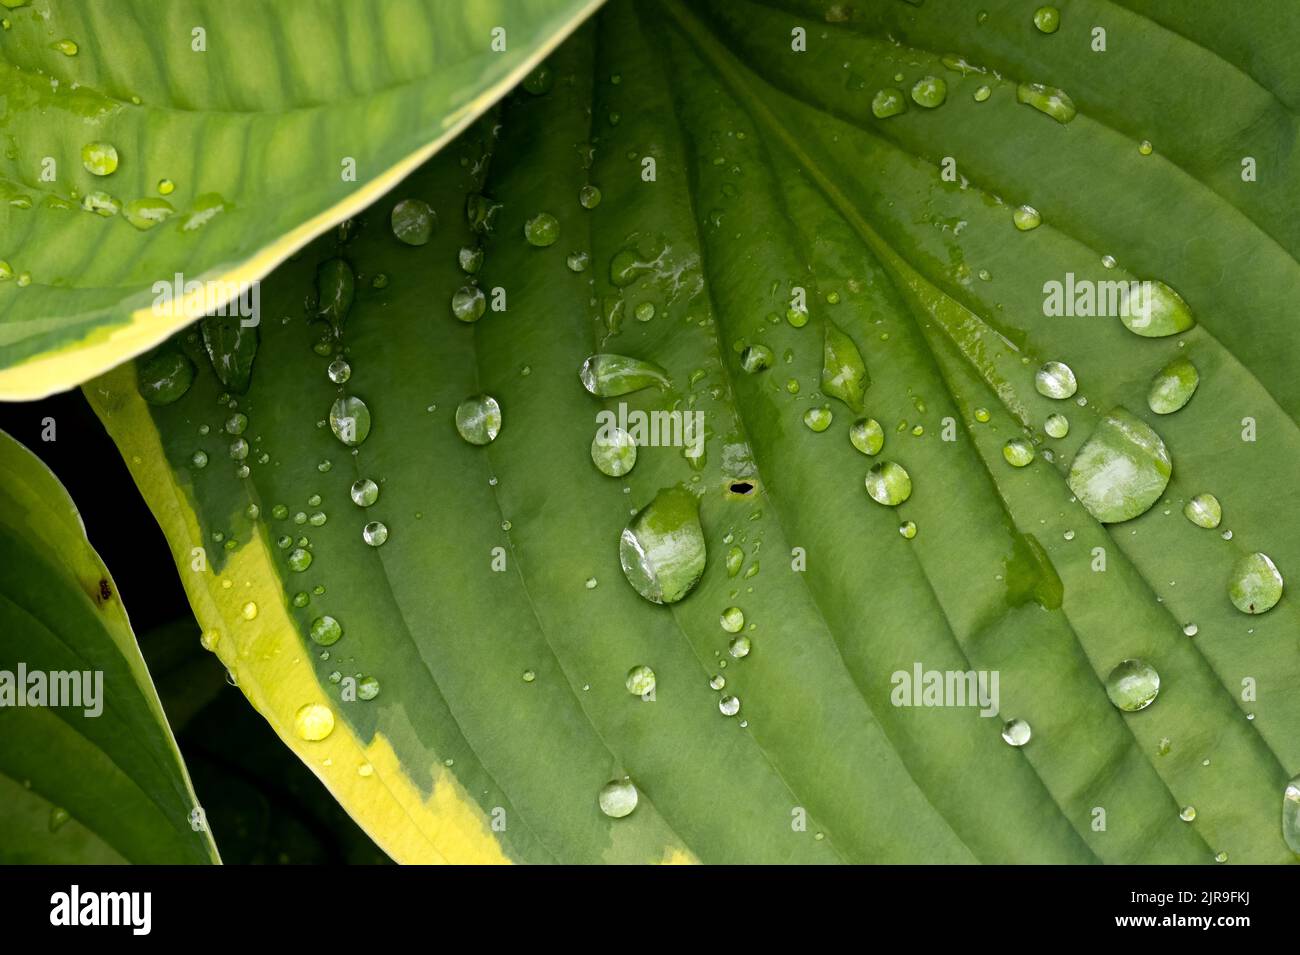 A macro shot of the water drops on a green leaf in Victoria, BC Canada Stock Photo